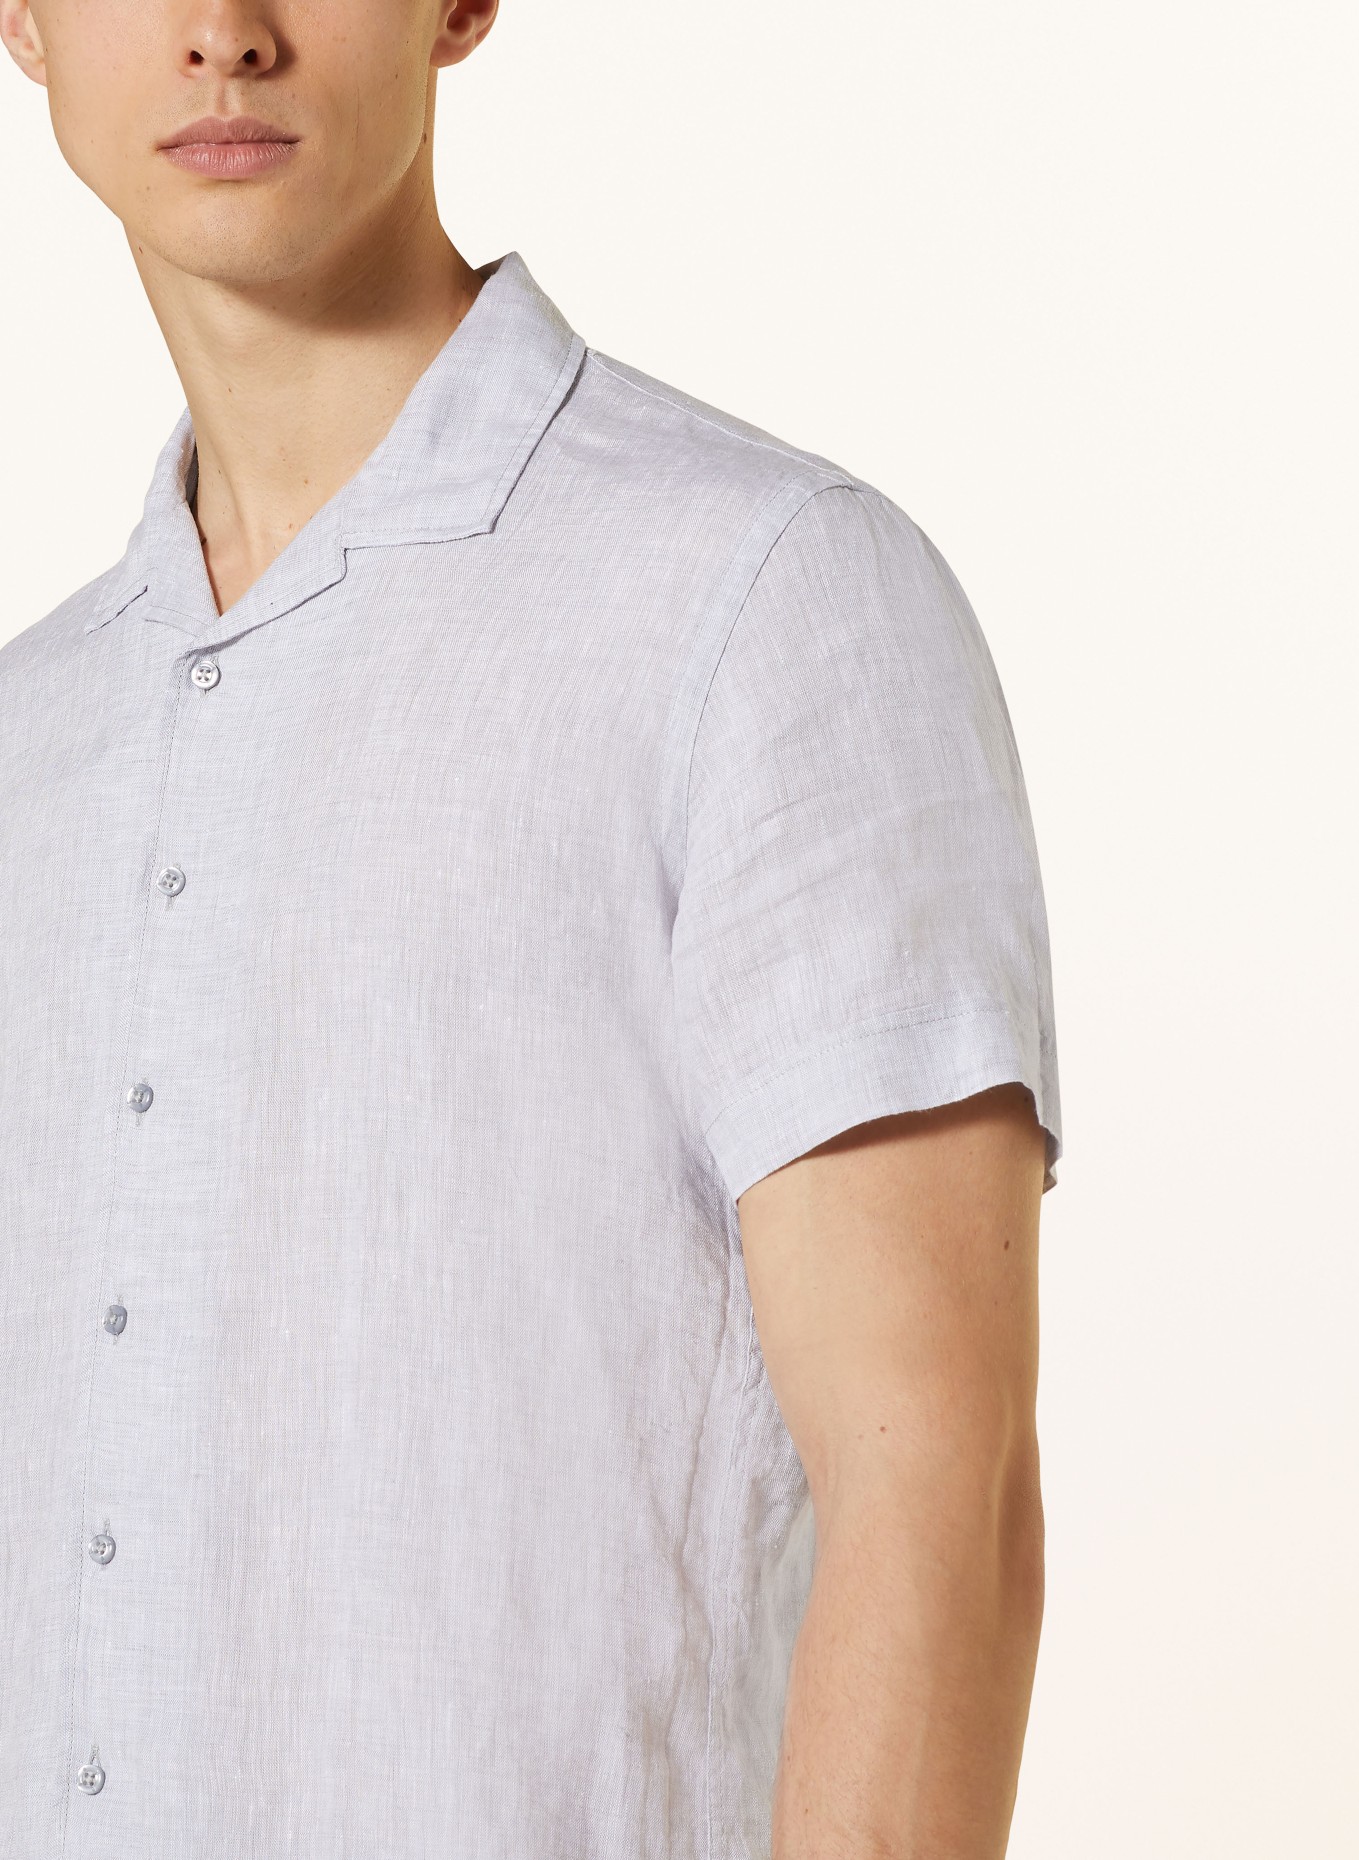 Q1 Manufaktur Resort shirt OLLY slim relaxed fit in linen, Color: GRAY (Image 4)